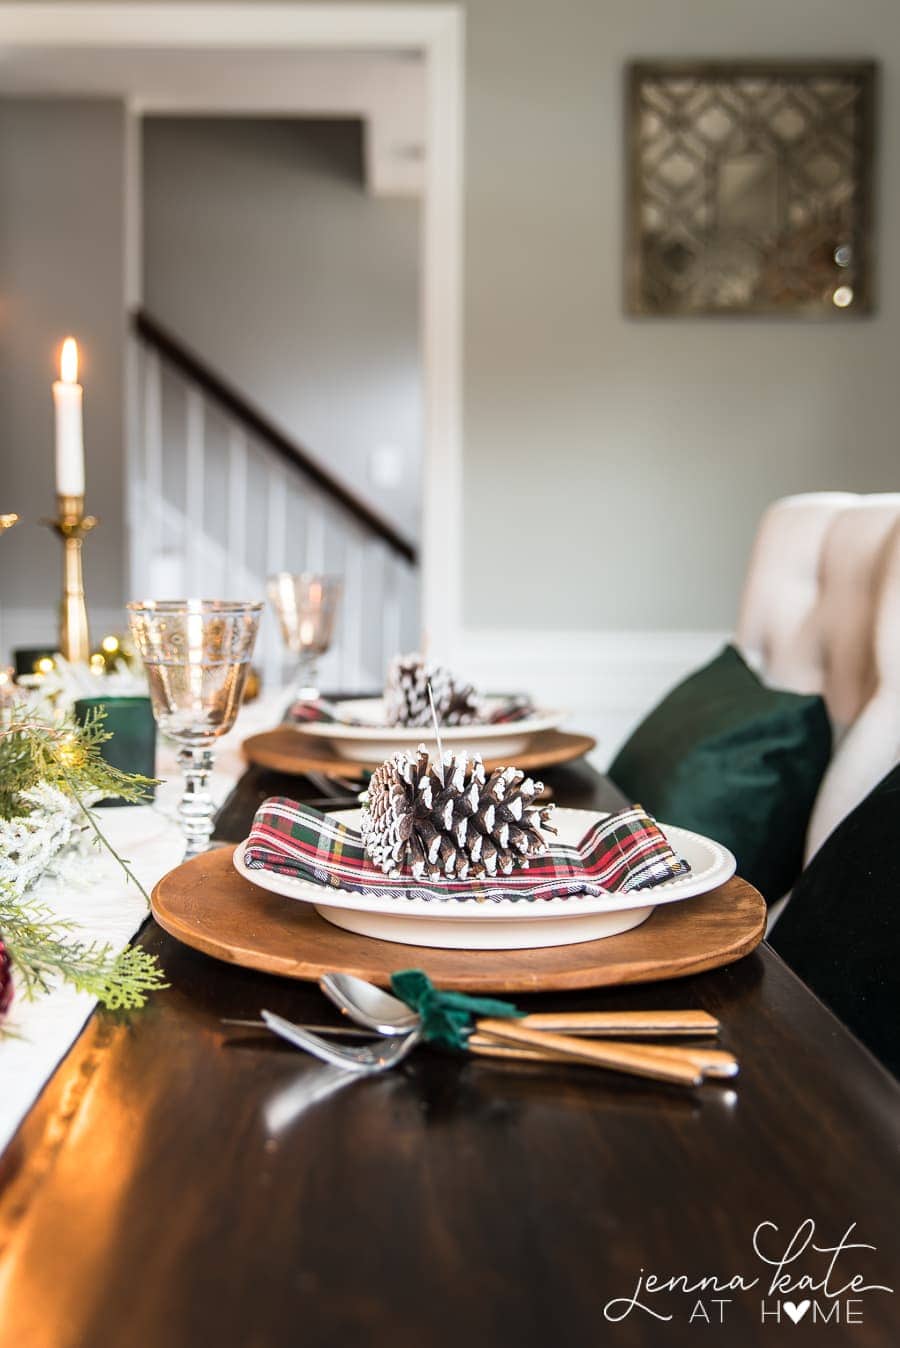 Pictures and ideas for traditional Christmas table setting decor